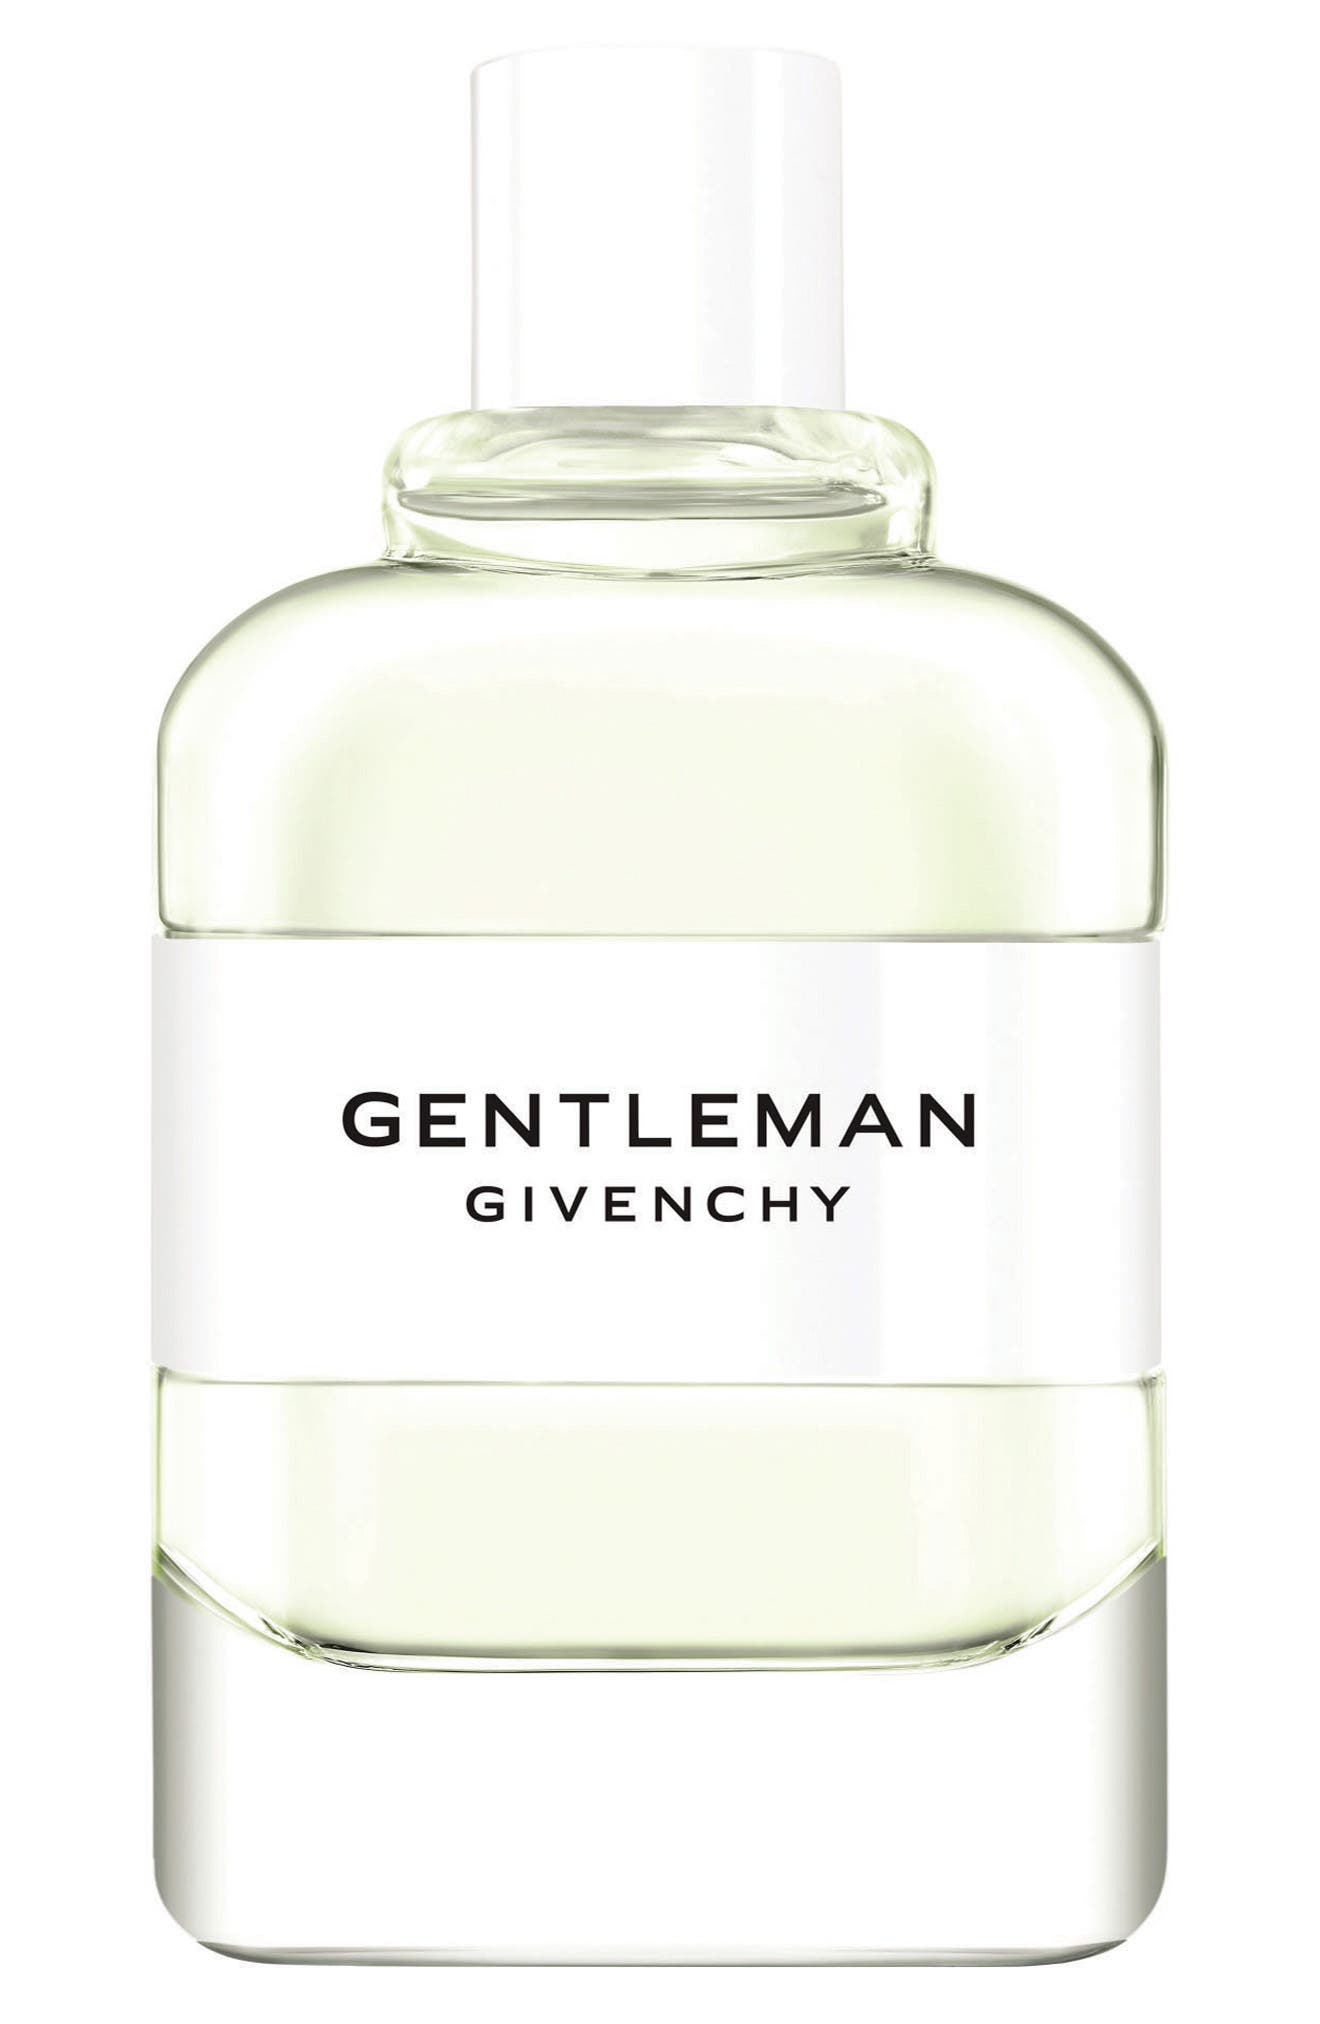 EAN 3274872382381 product image for Givenchy Gentleman Cologne, Size - One Size | upcitemdb.com